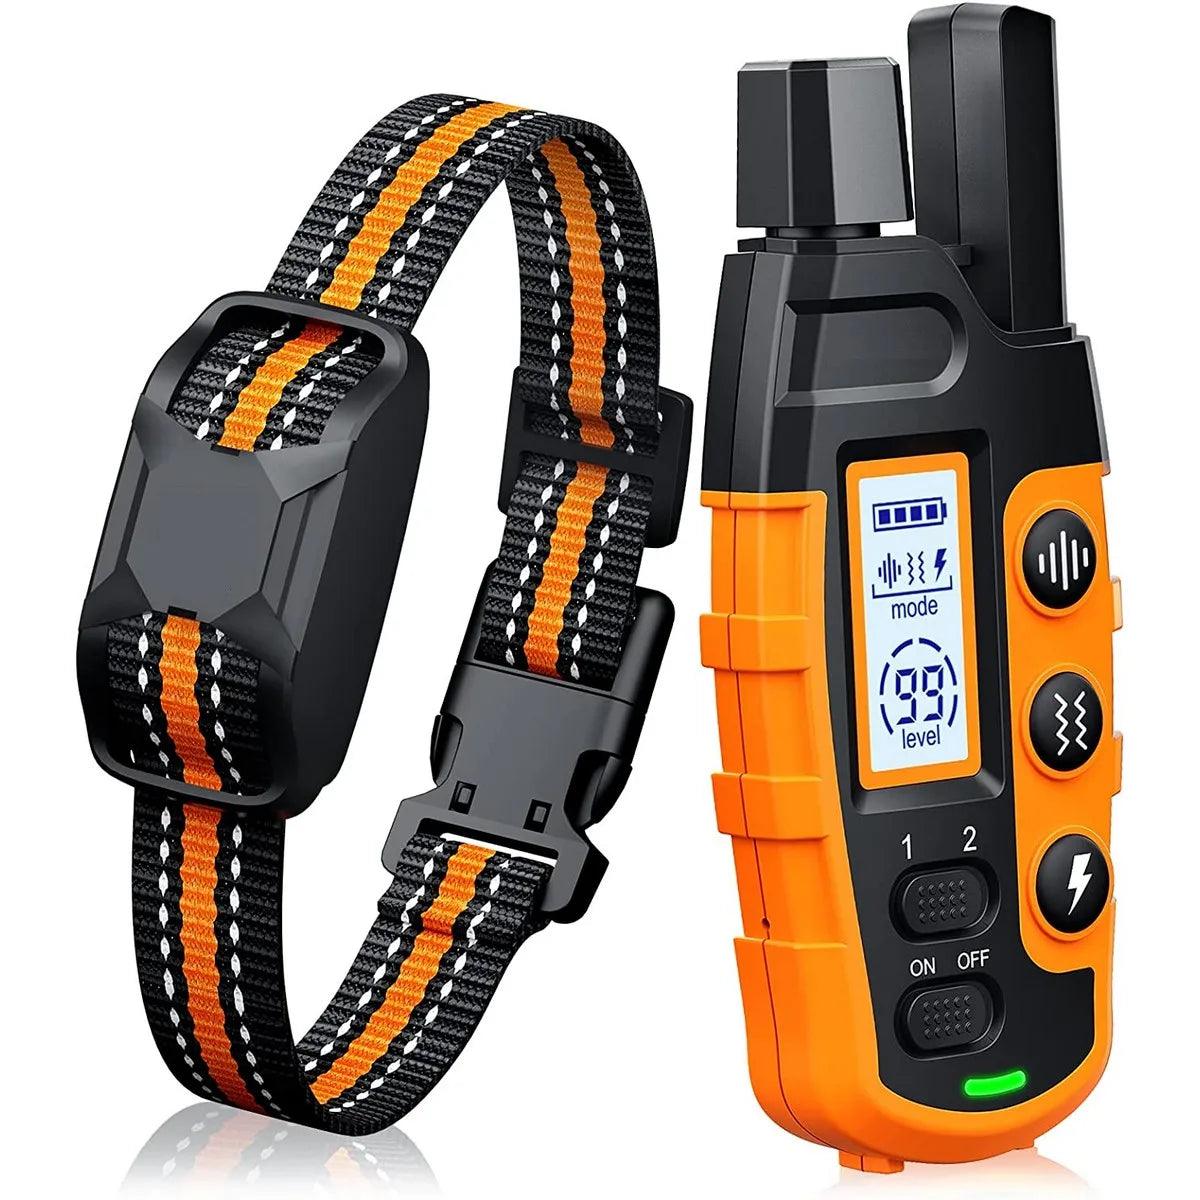 Advanced Remote Dog Training Collar for Effective 3300Ft Range Control with Beep Vibration Shock - Waterproof & Rechargeable Technology for High-Quality Pet Training  ourlum.com   